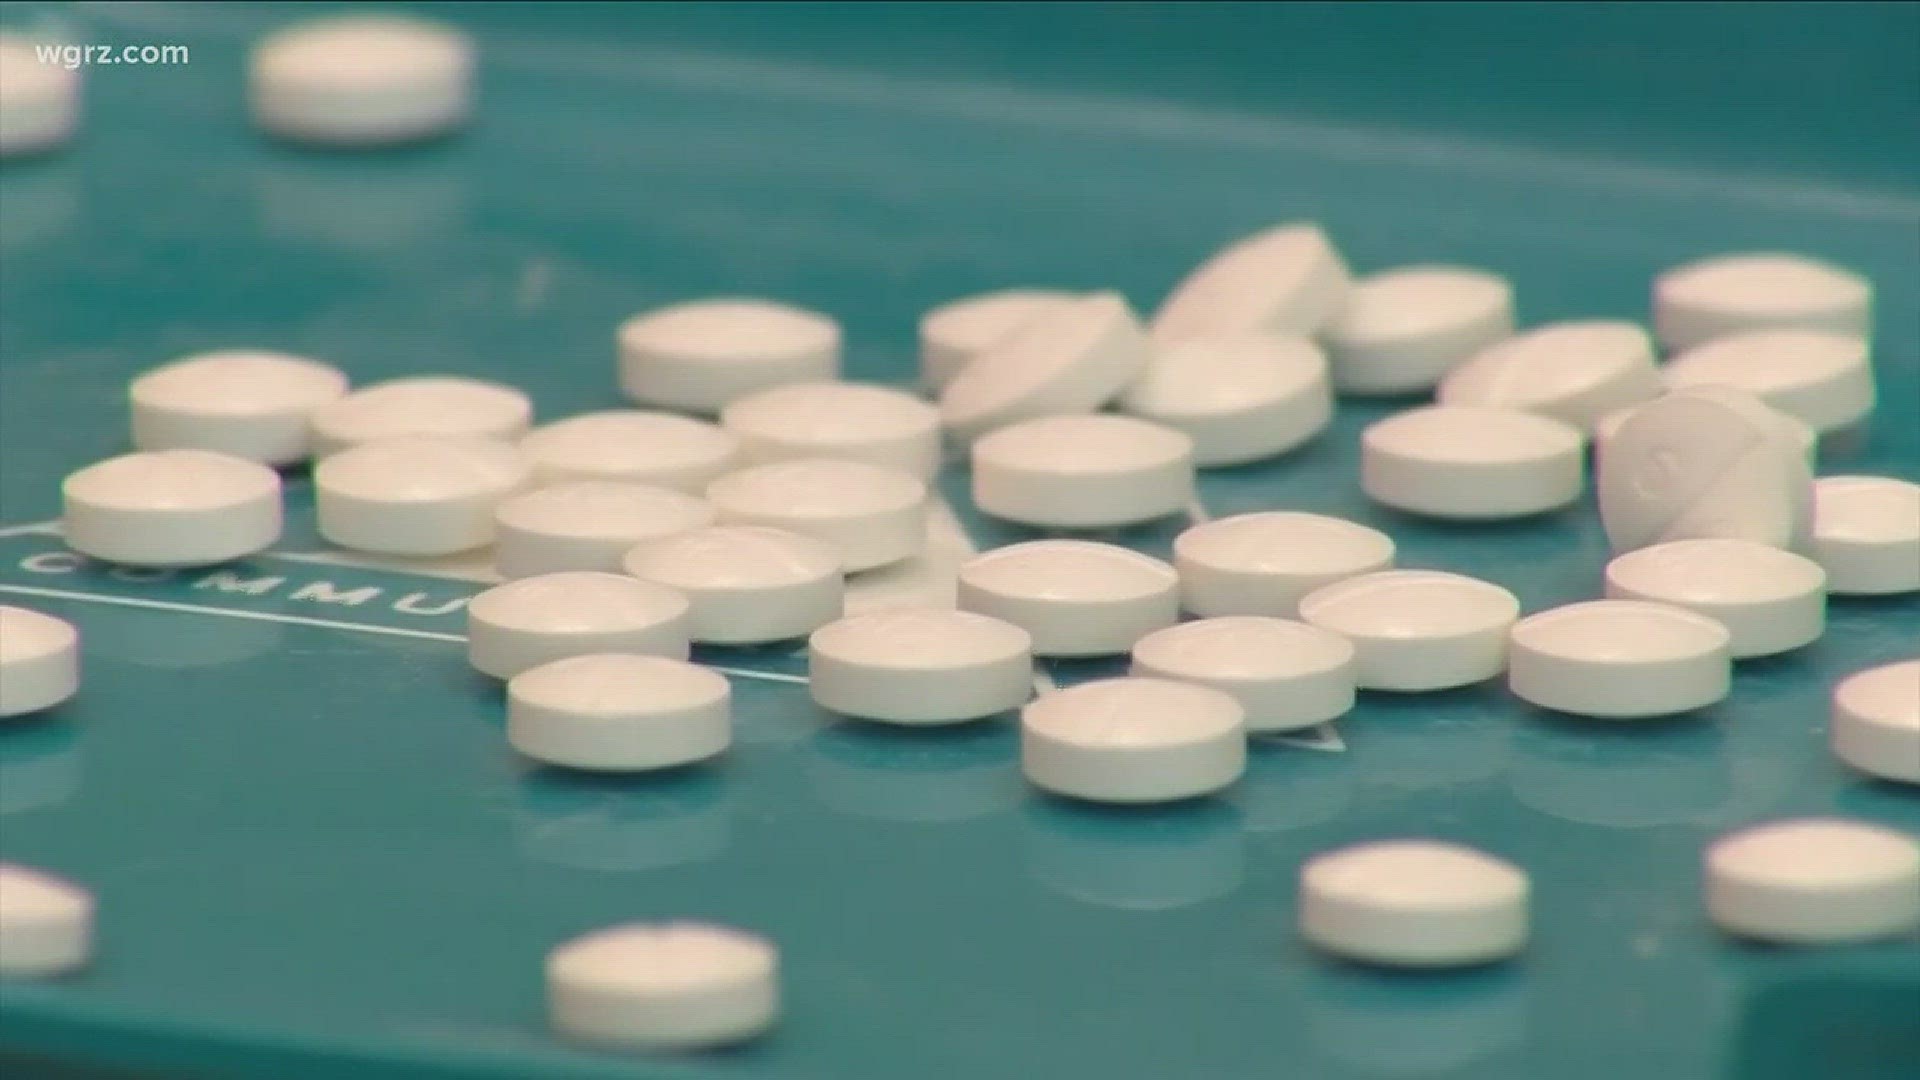 Report: Rural Areas Have Higher Opioid Rates